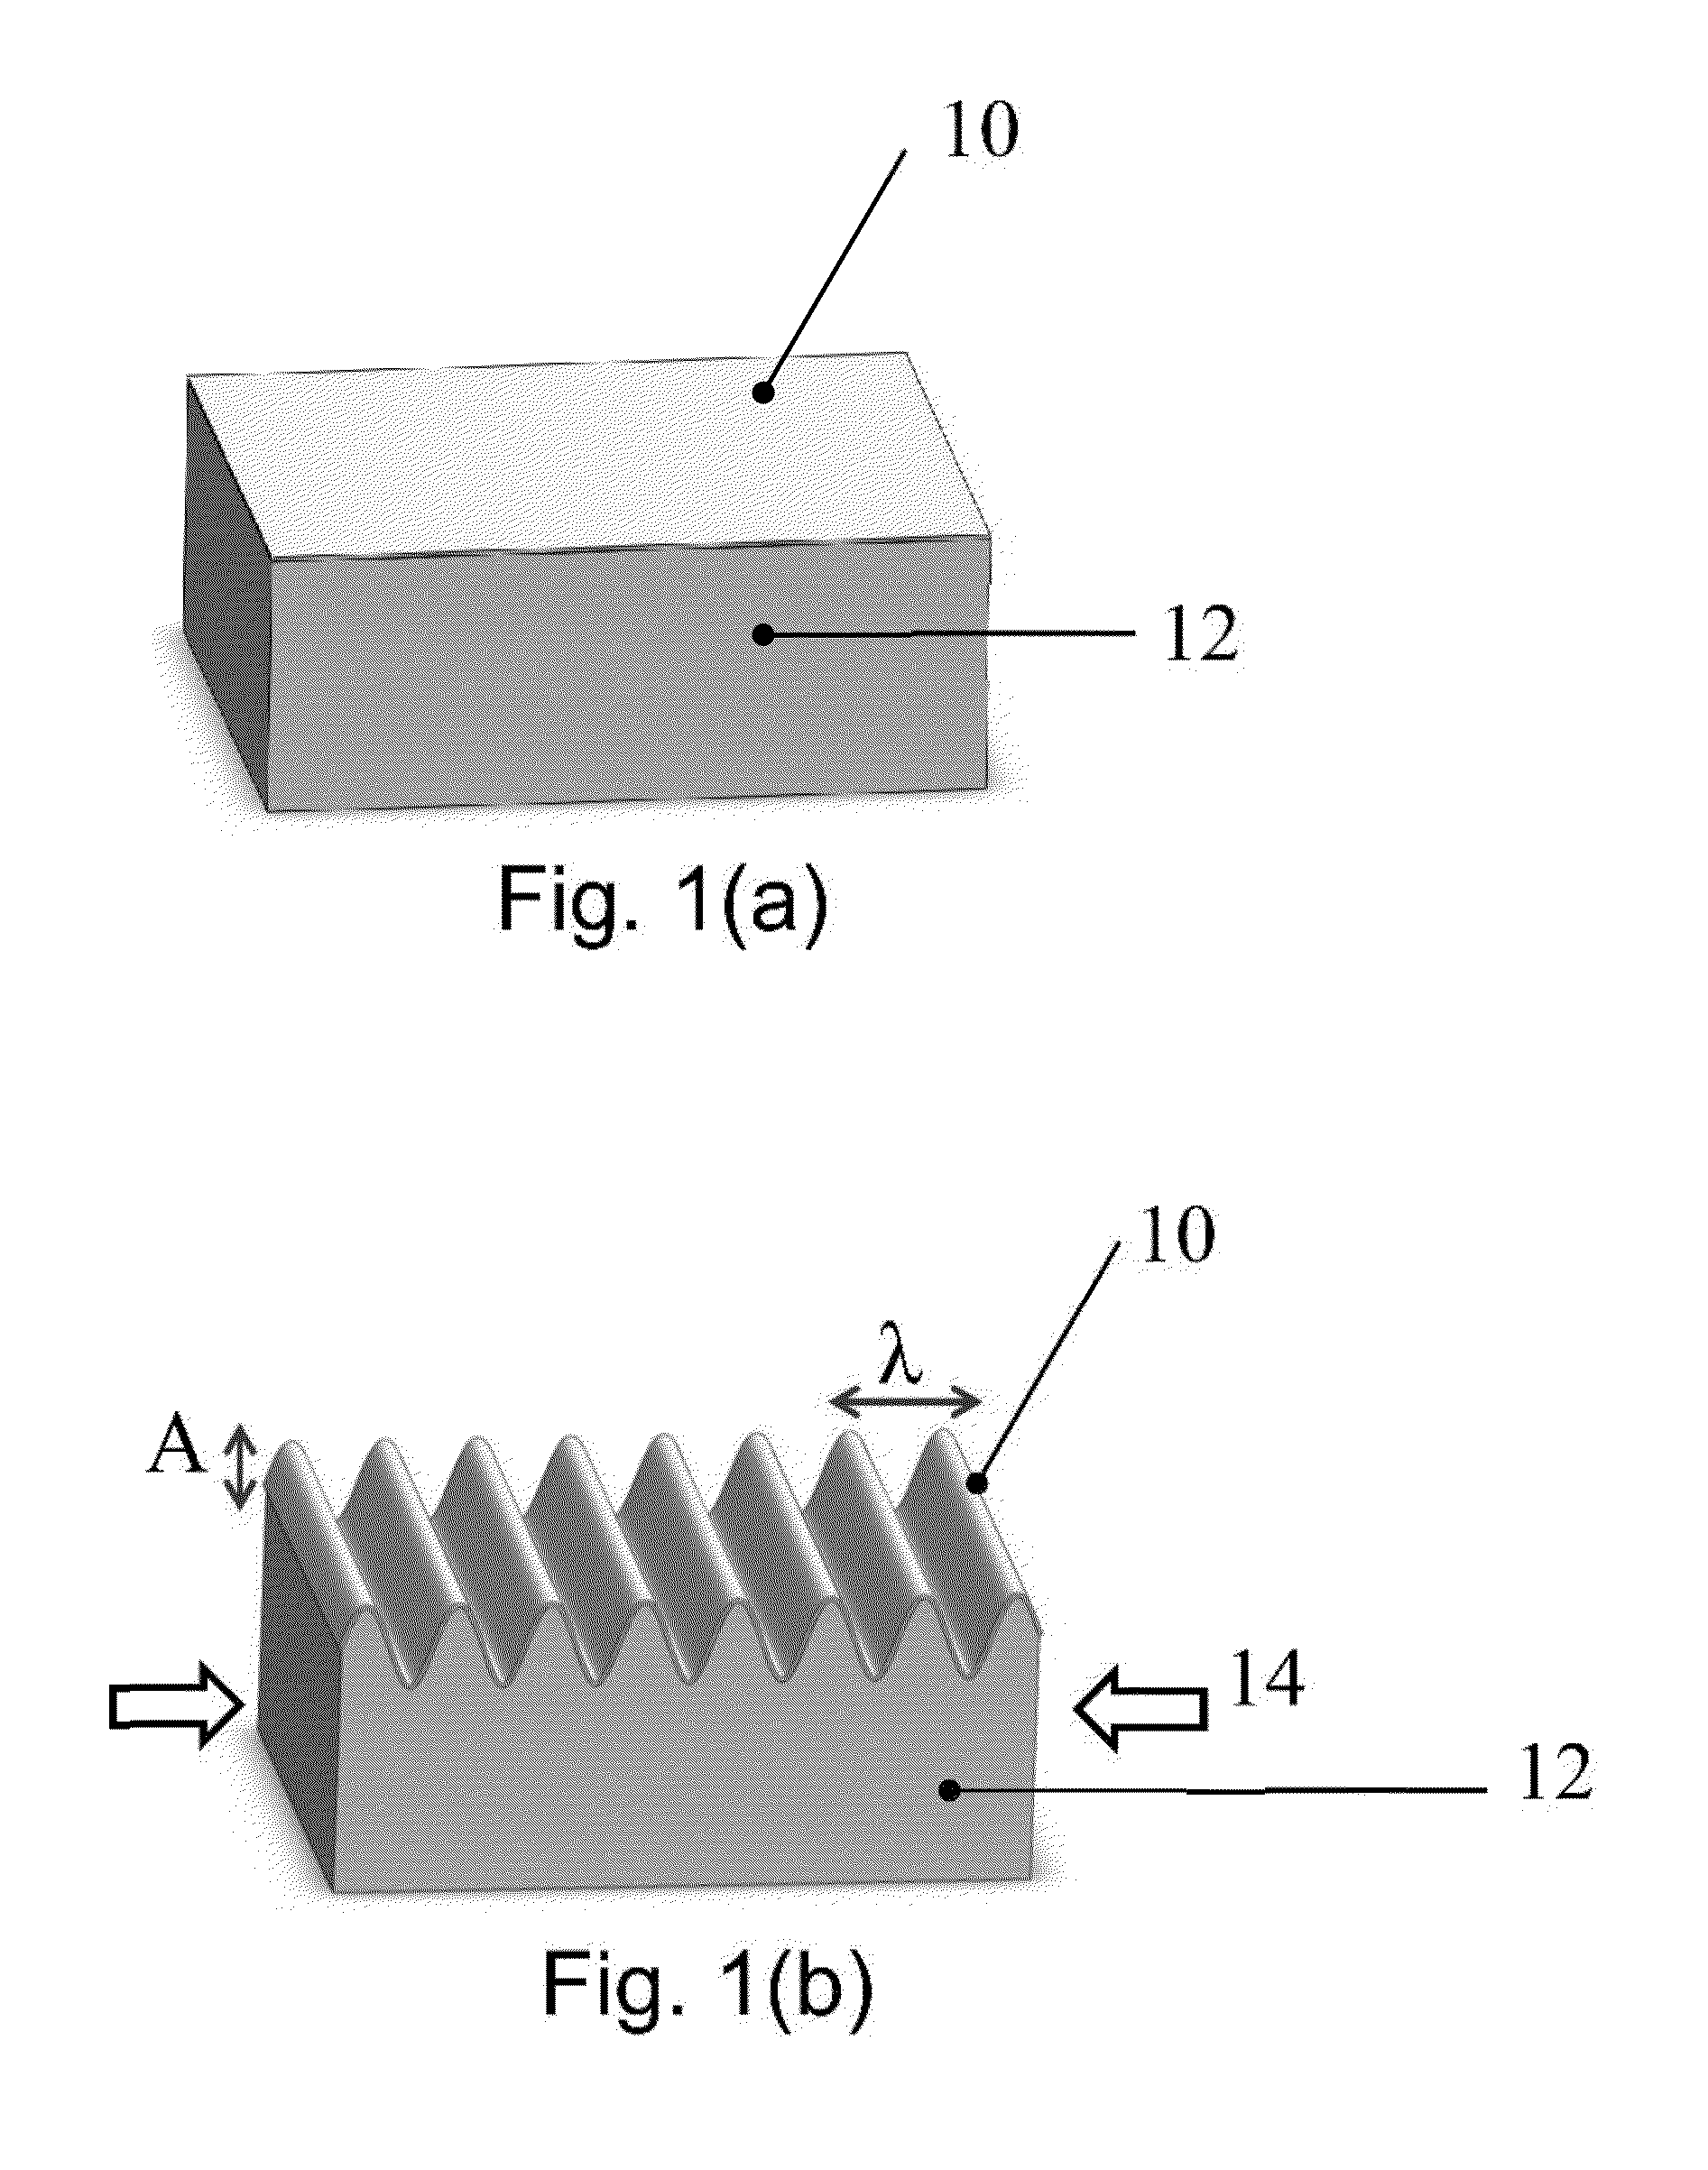 Biaxial tensile stage for fabricating and tuning wrinkles